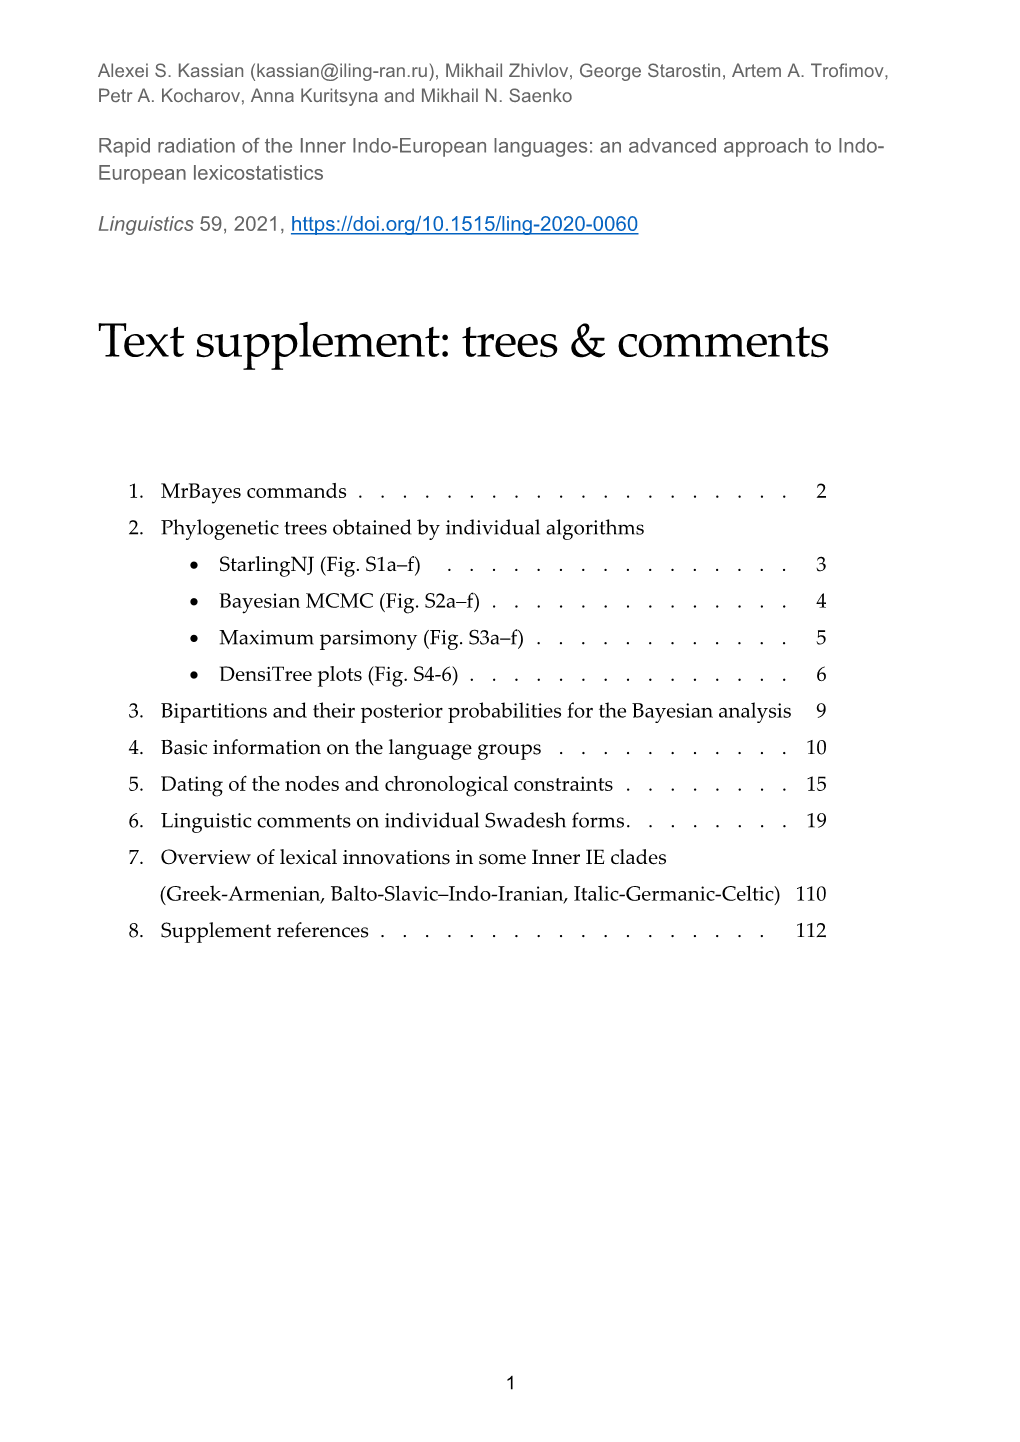 Text Supplement: Trees & Comments